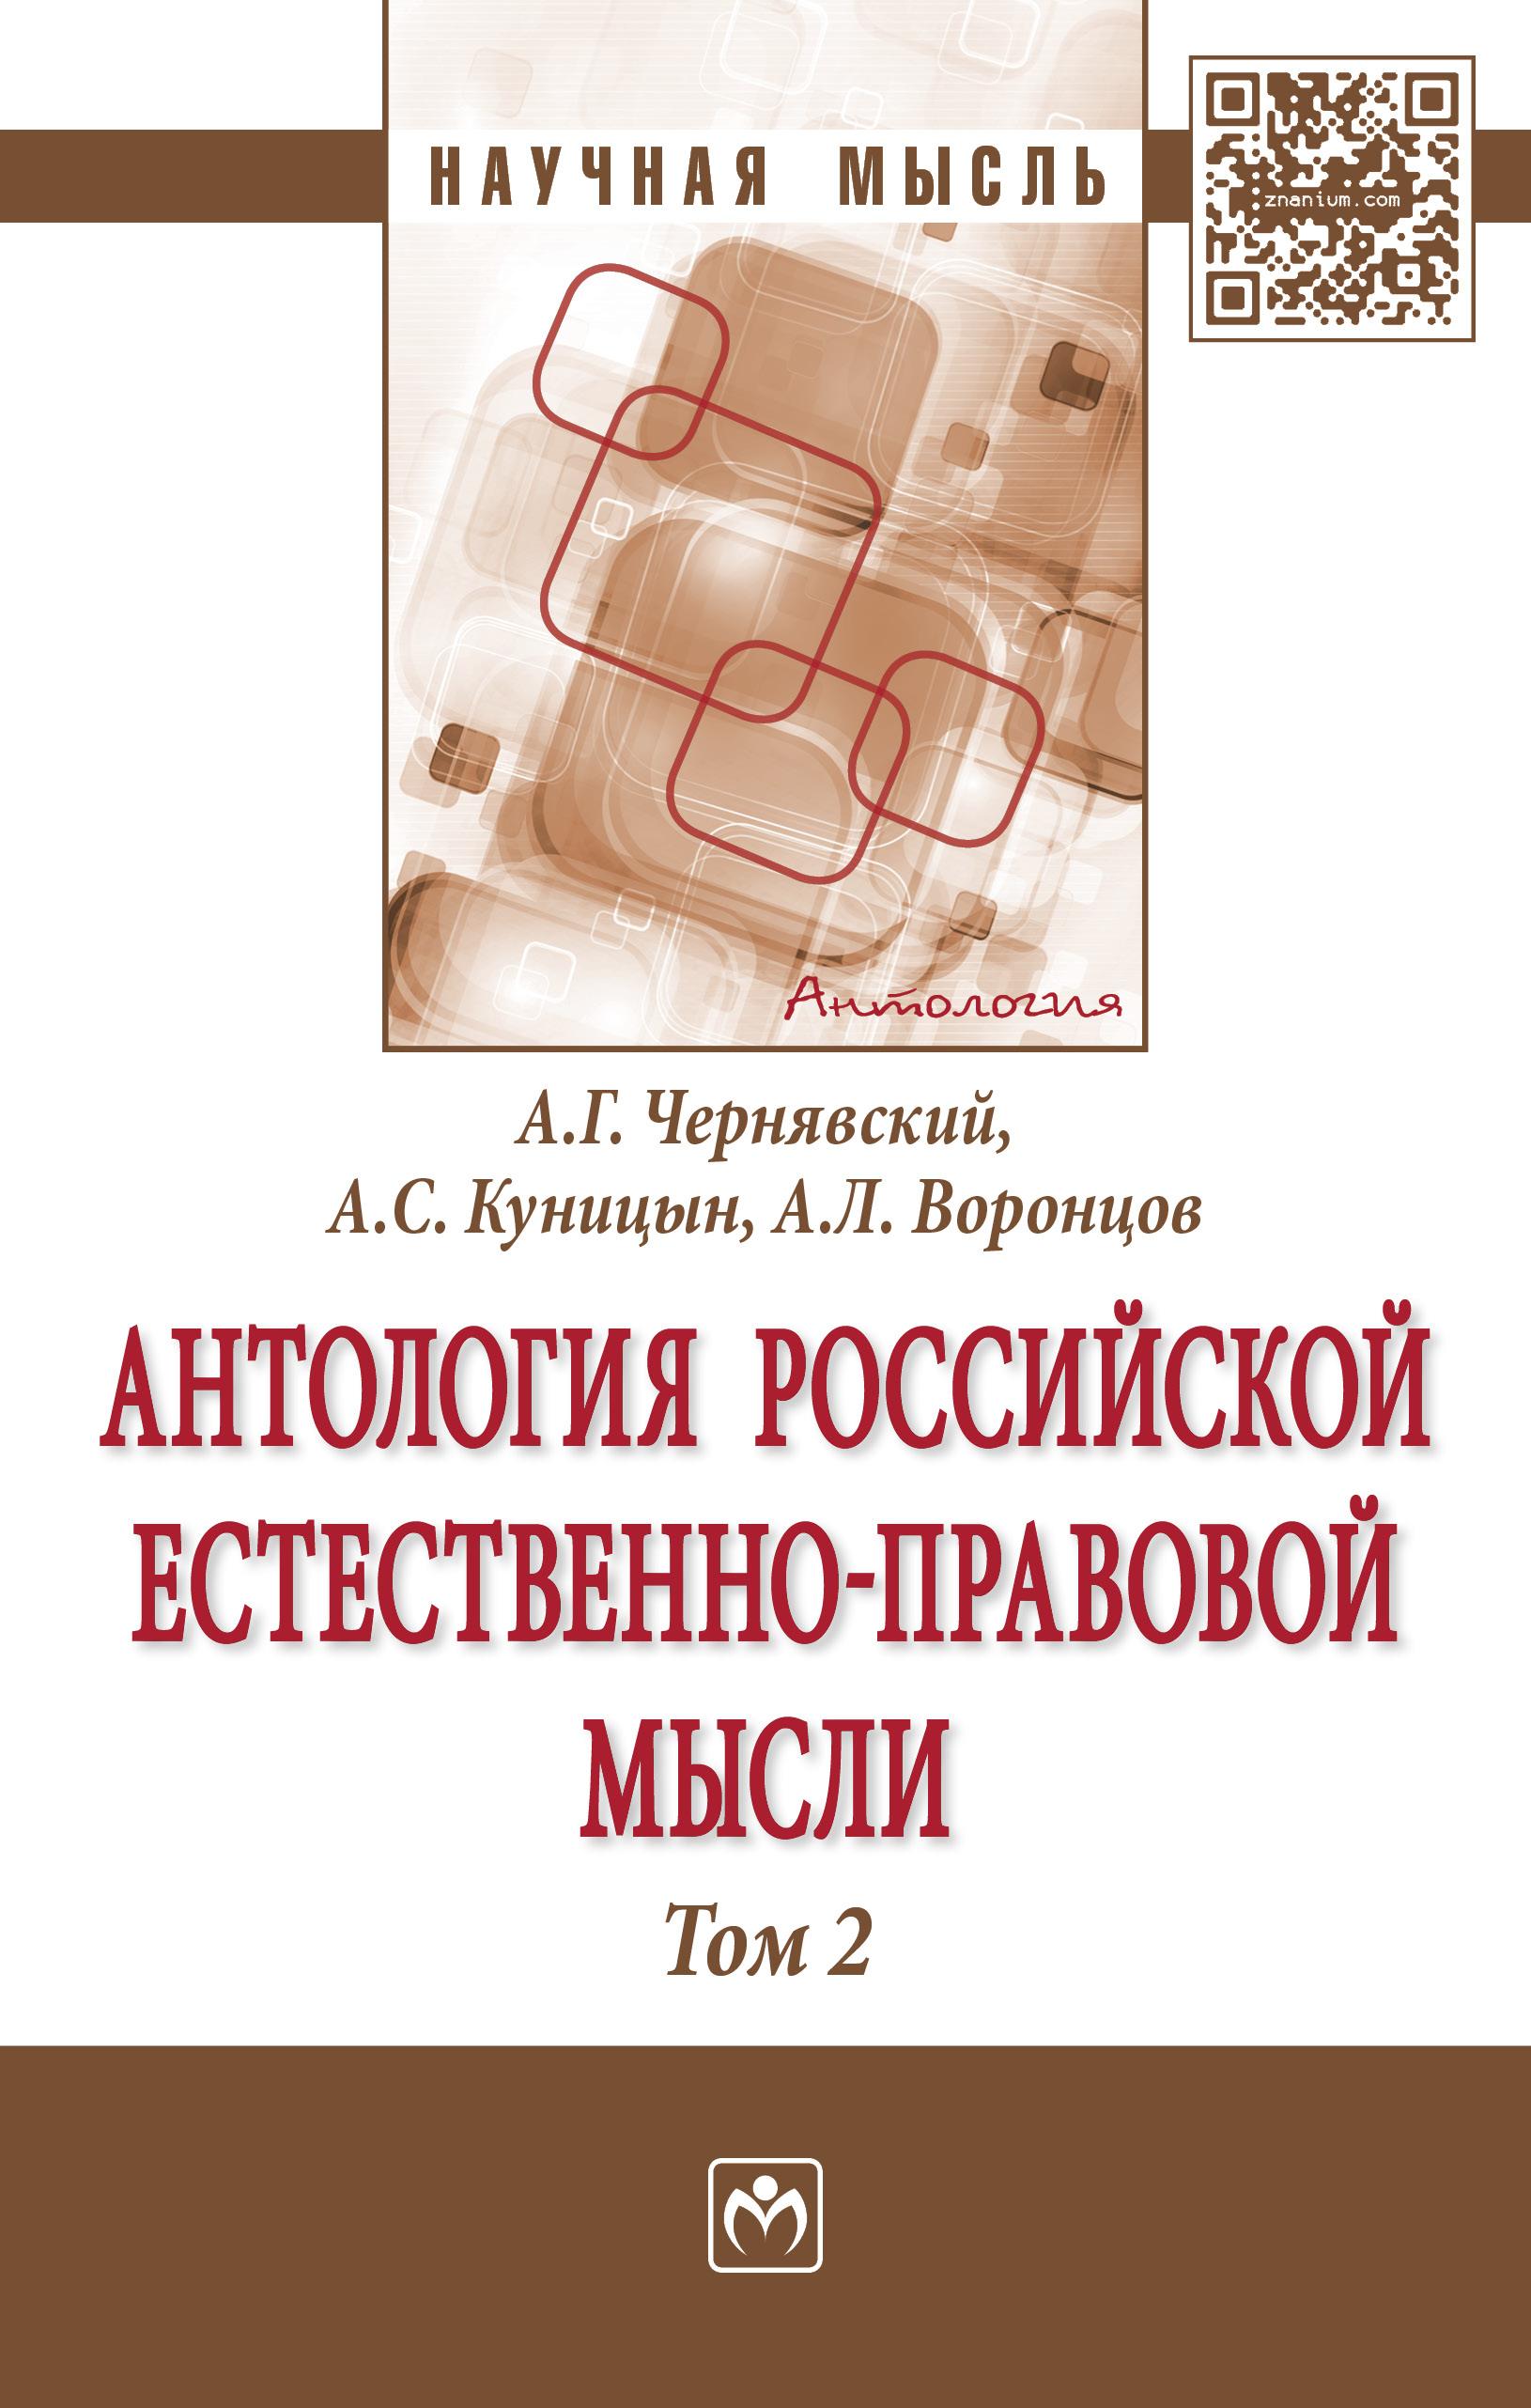                         Anthology of Russian natural-legal thought: In 3 volumes. Volume II. Russian natural-legal thought of XVIII-first half of XIX century.
            